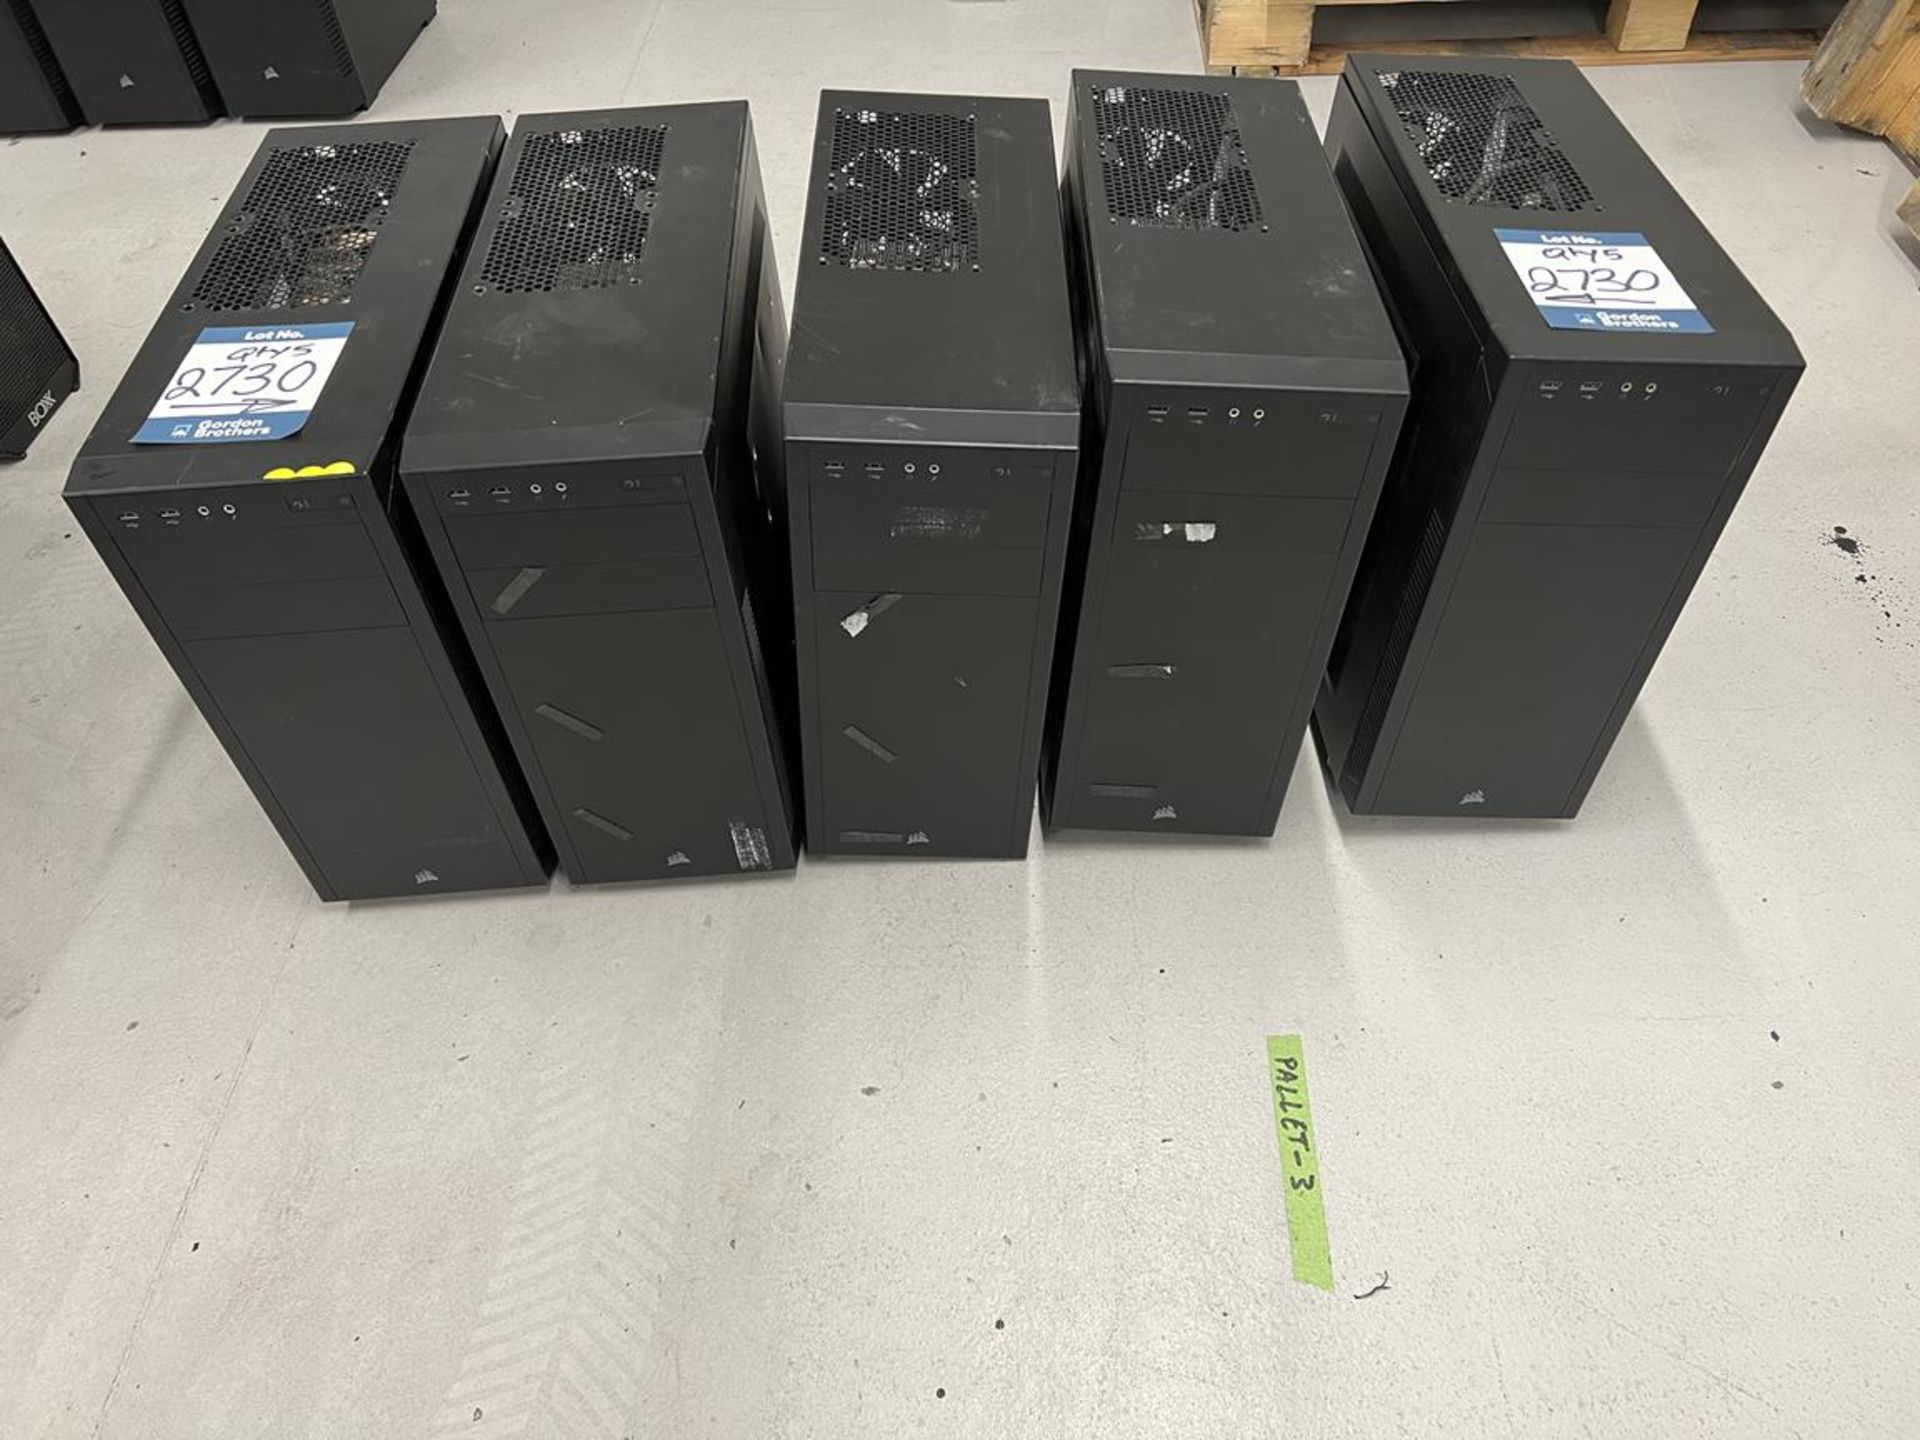 5x (no.) computer towers used for CAD (NO HDD and NO RAM) with Asus, GeForce GTX video card